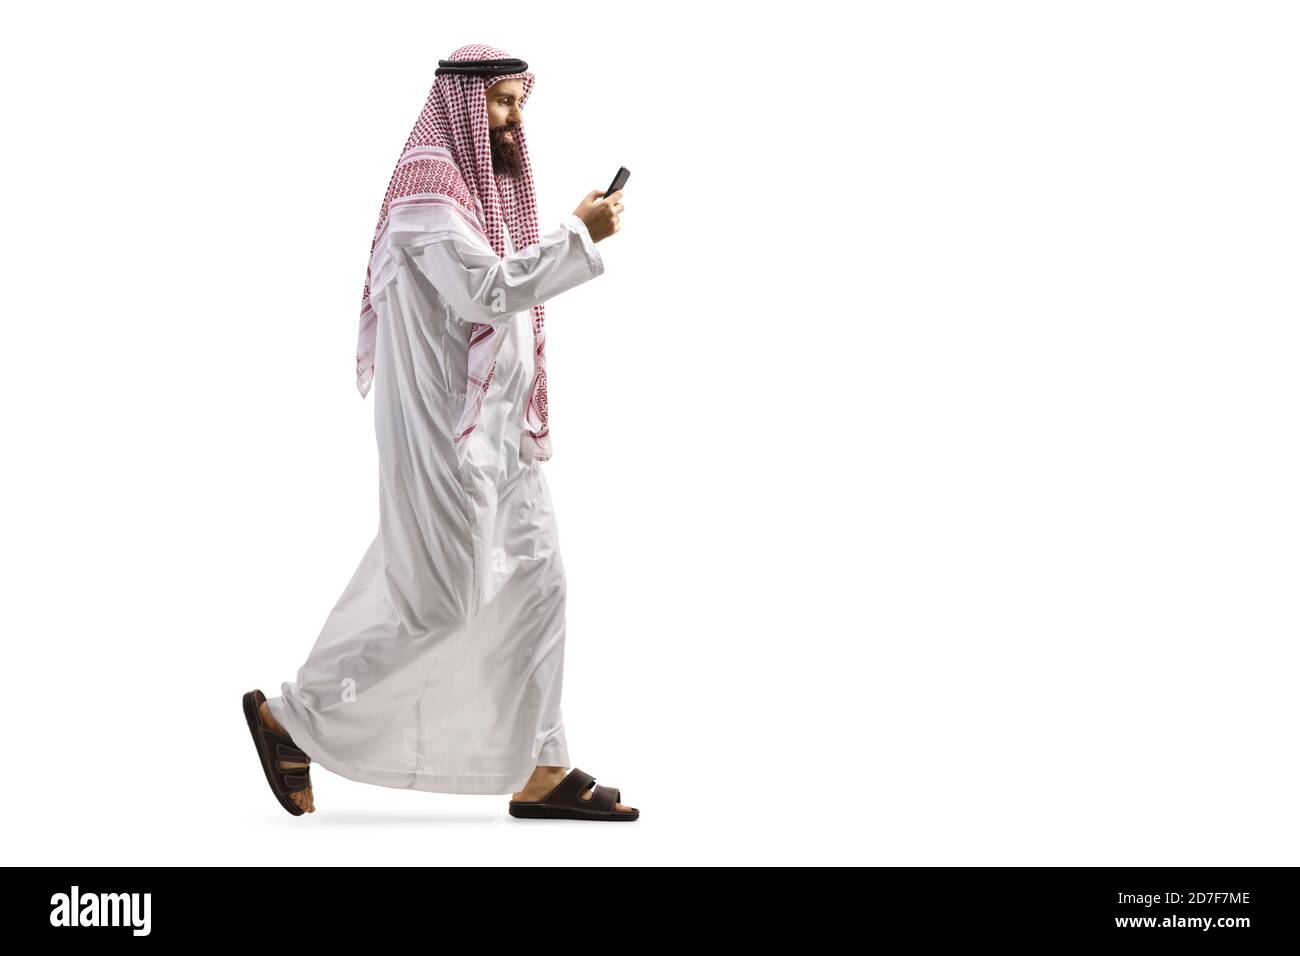 Full length profile shot of an arab man using a smartphone and walking isolated on white background Stock Photo